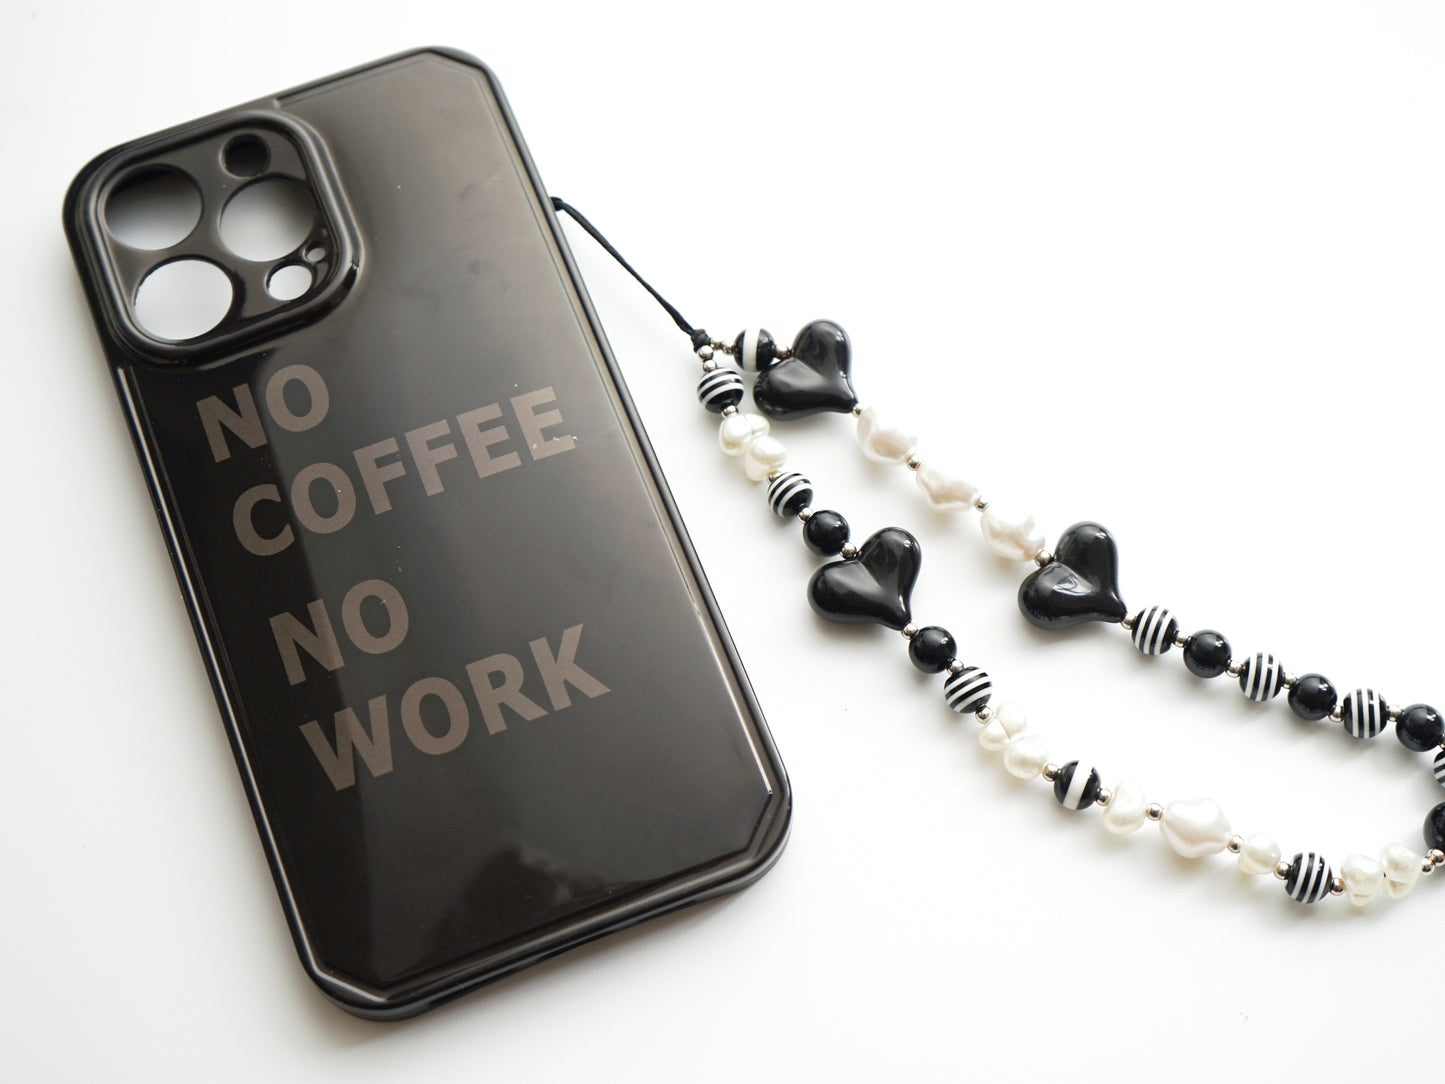 iPhone Case for Coffeeholics